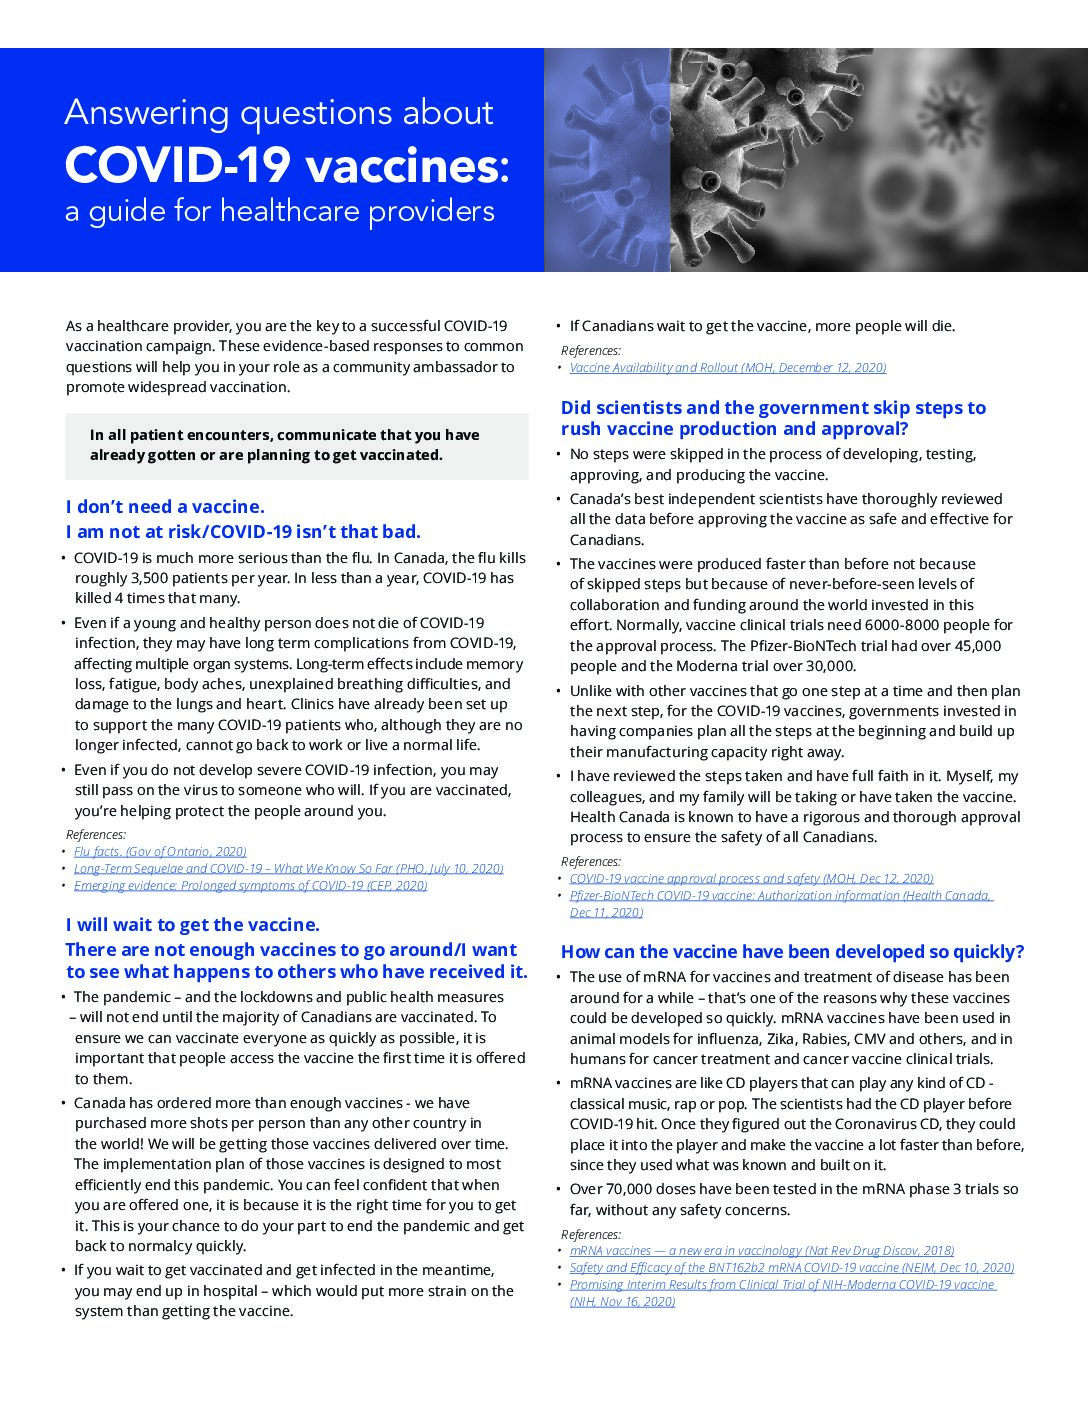 Answering questions about COVID-19 vaccines